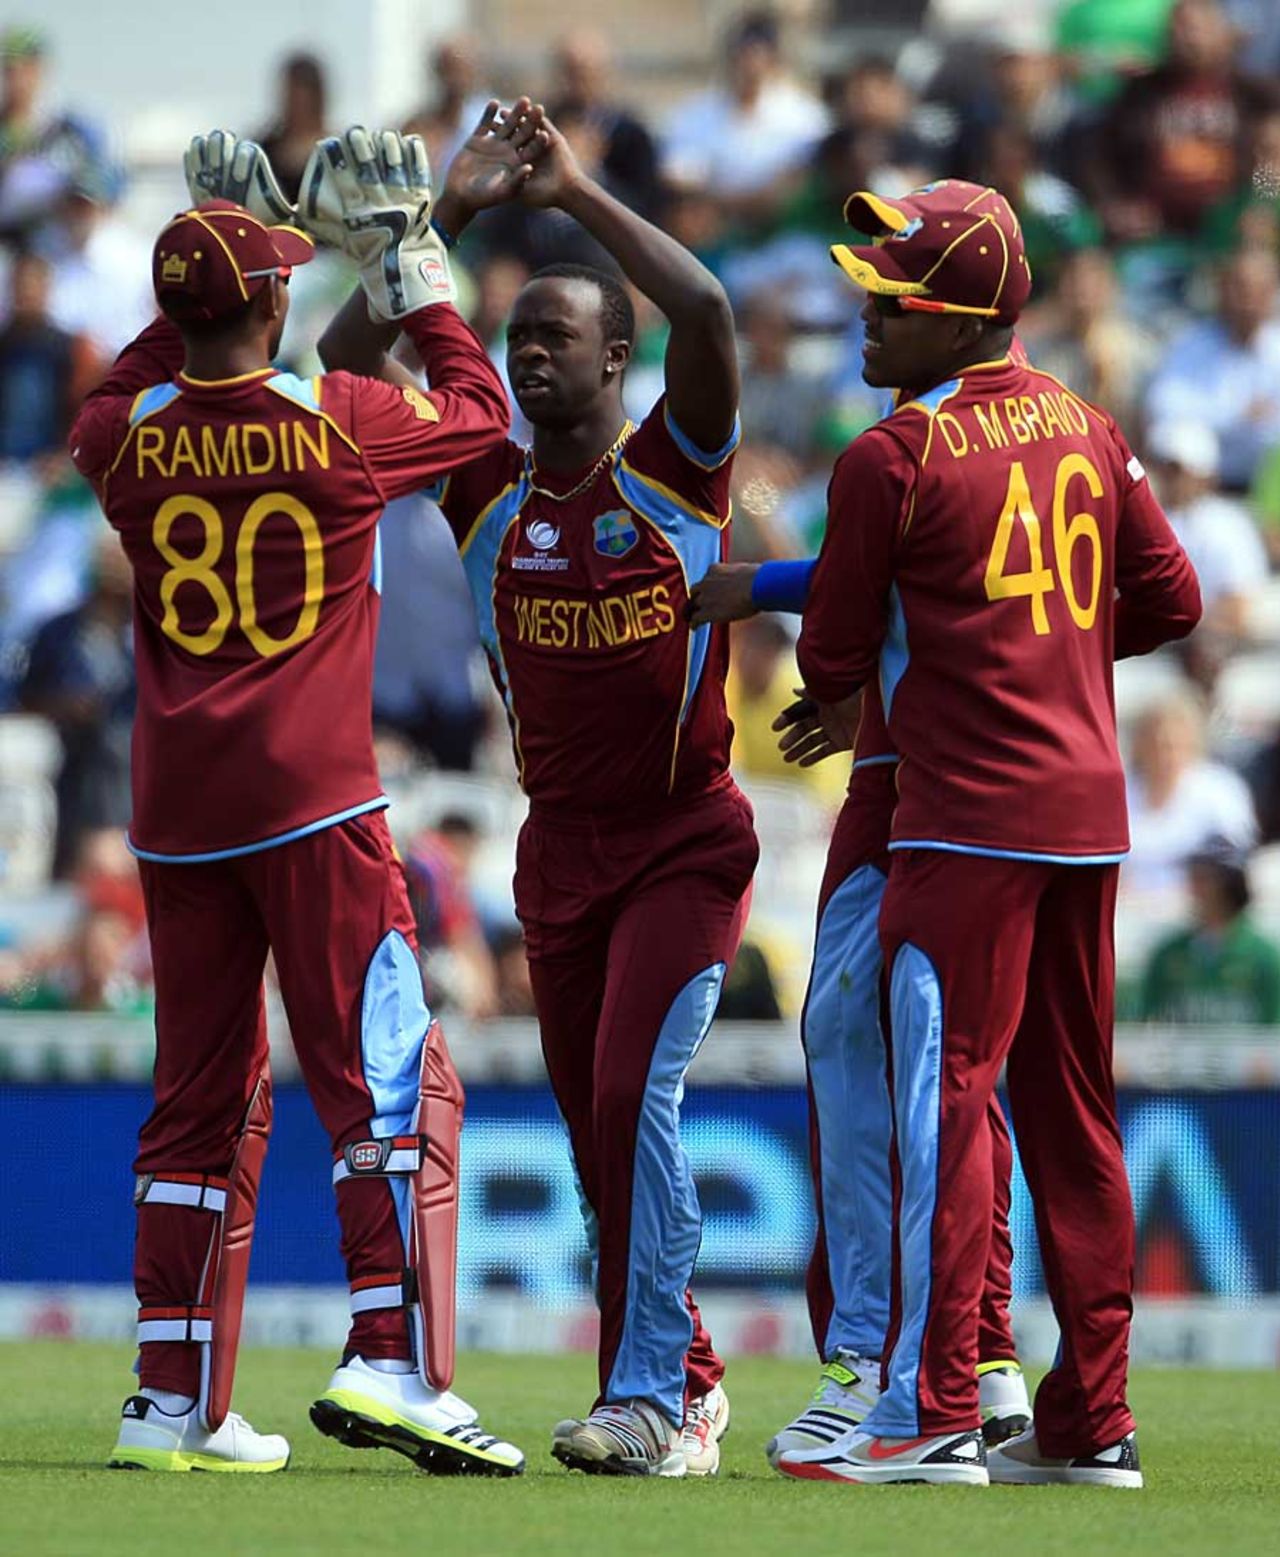 Kemar Roach struck early for West Indies, West Indies v Pakistan, Champions Trophy, Group B, The Oval, June 7, 2013